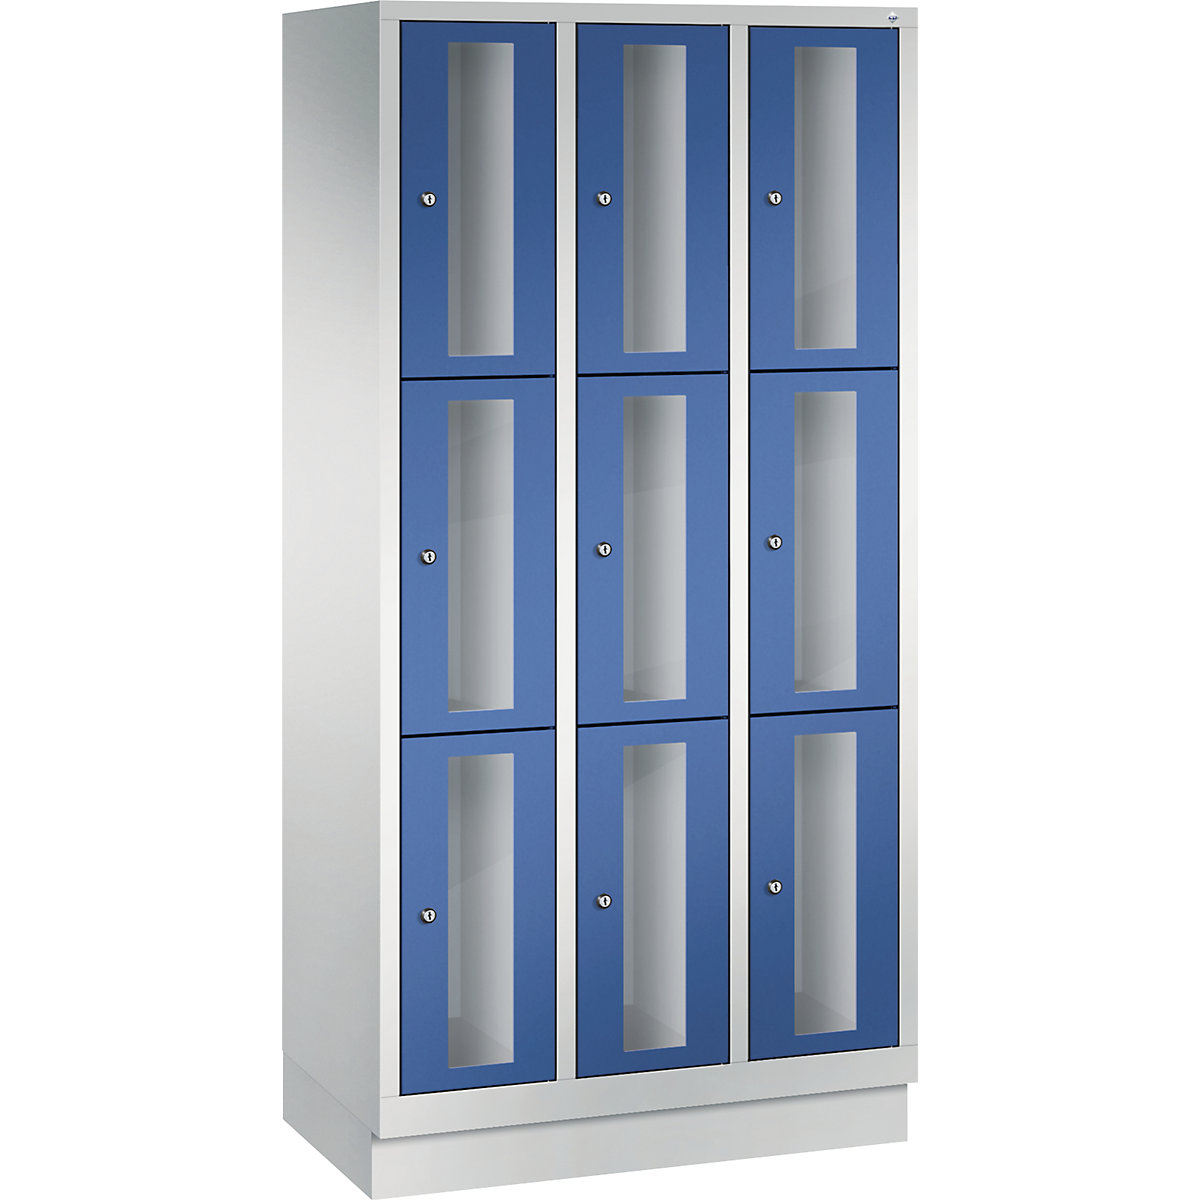 C+P – CLASSIC locker unit, compartment height 510 mm, with plinth, 9 compartments, width 900 mm, gentian blue door